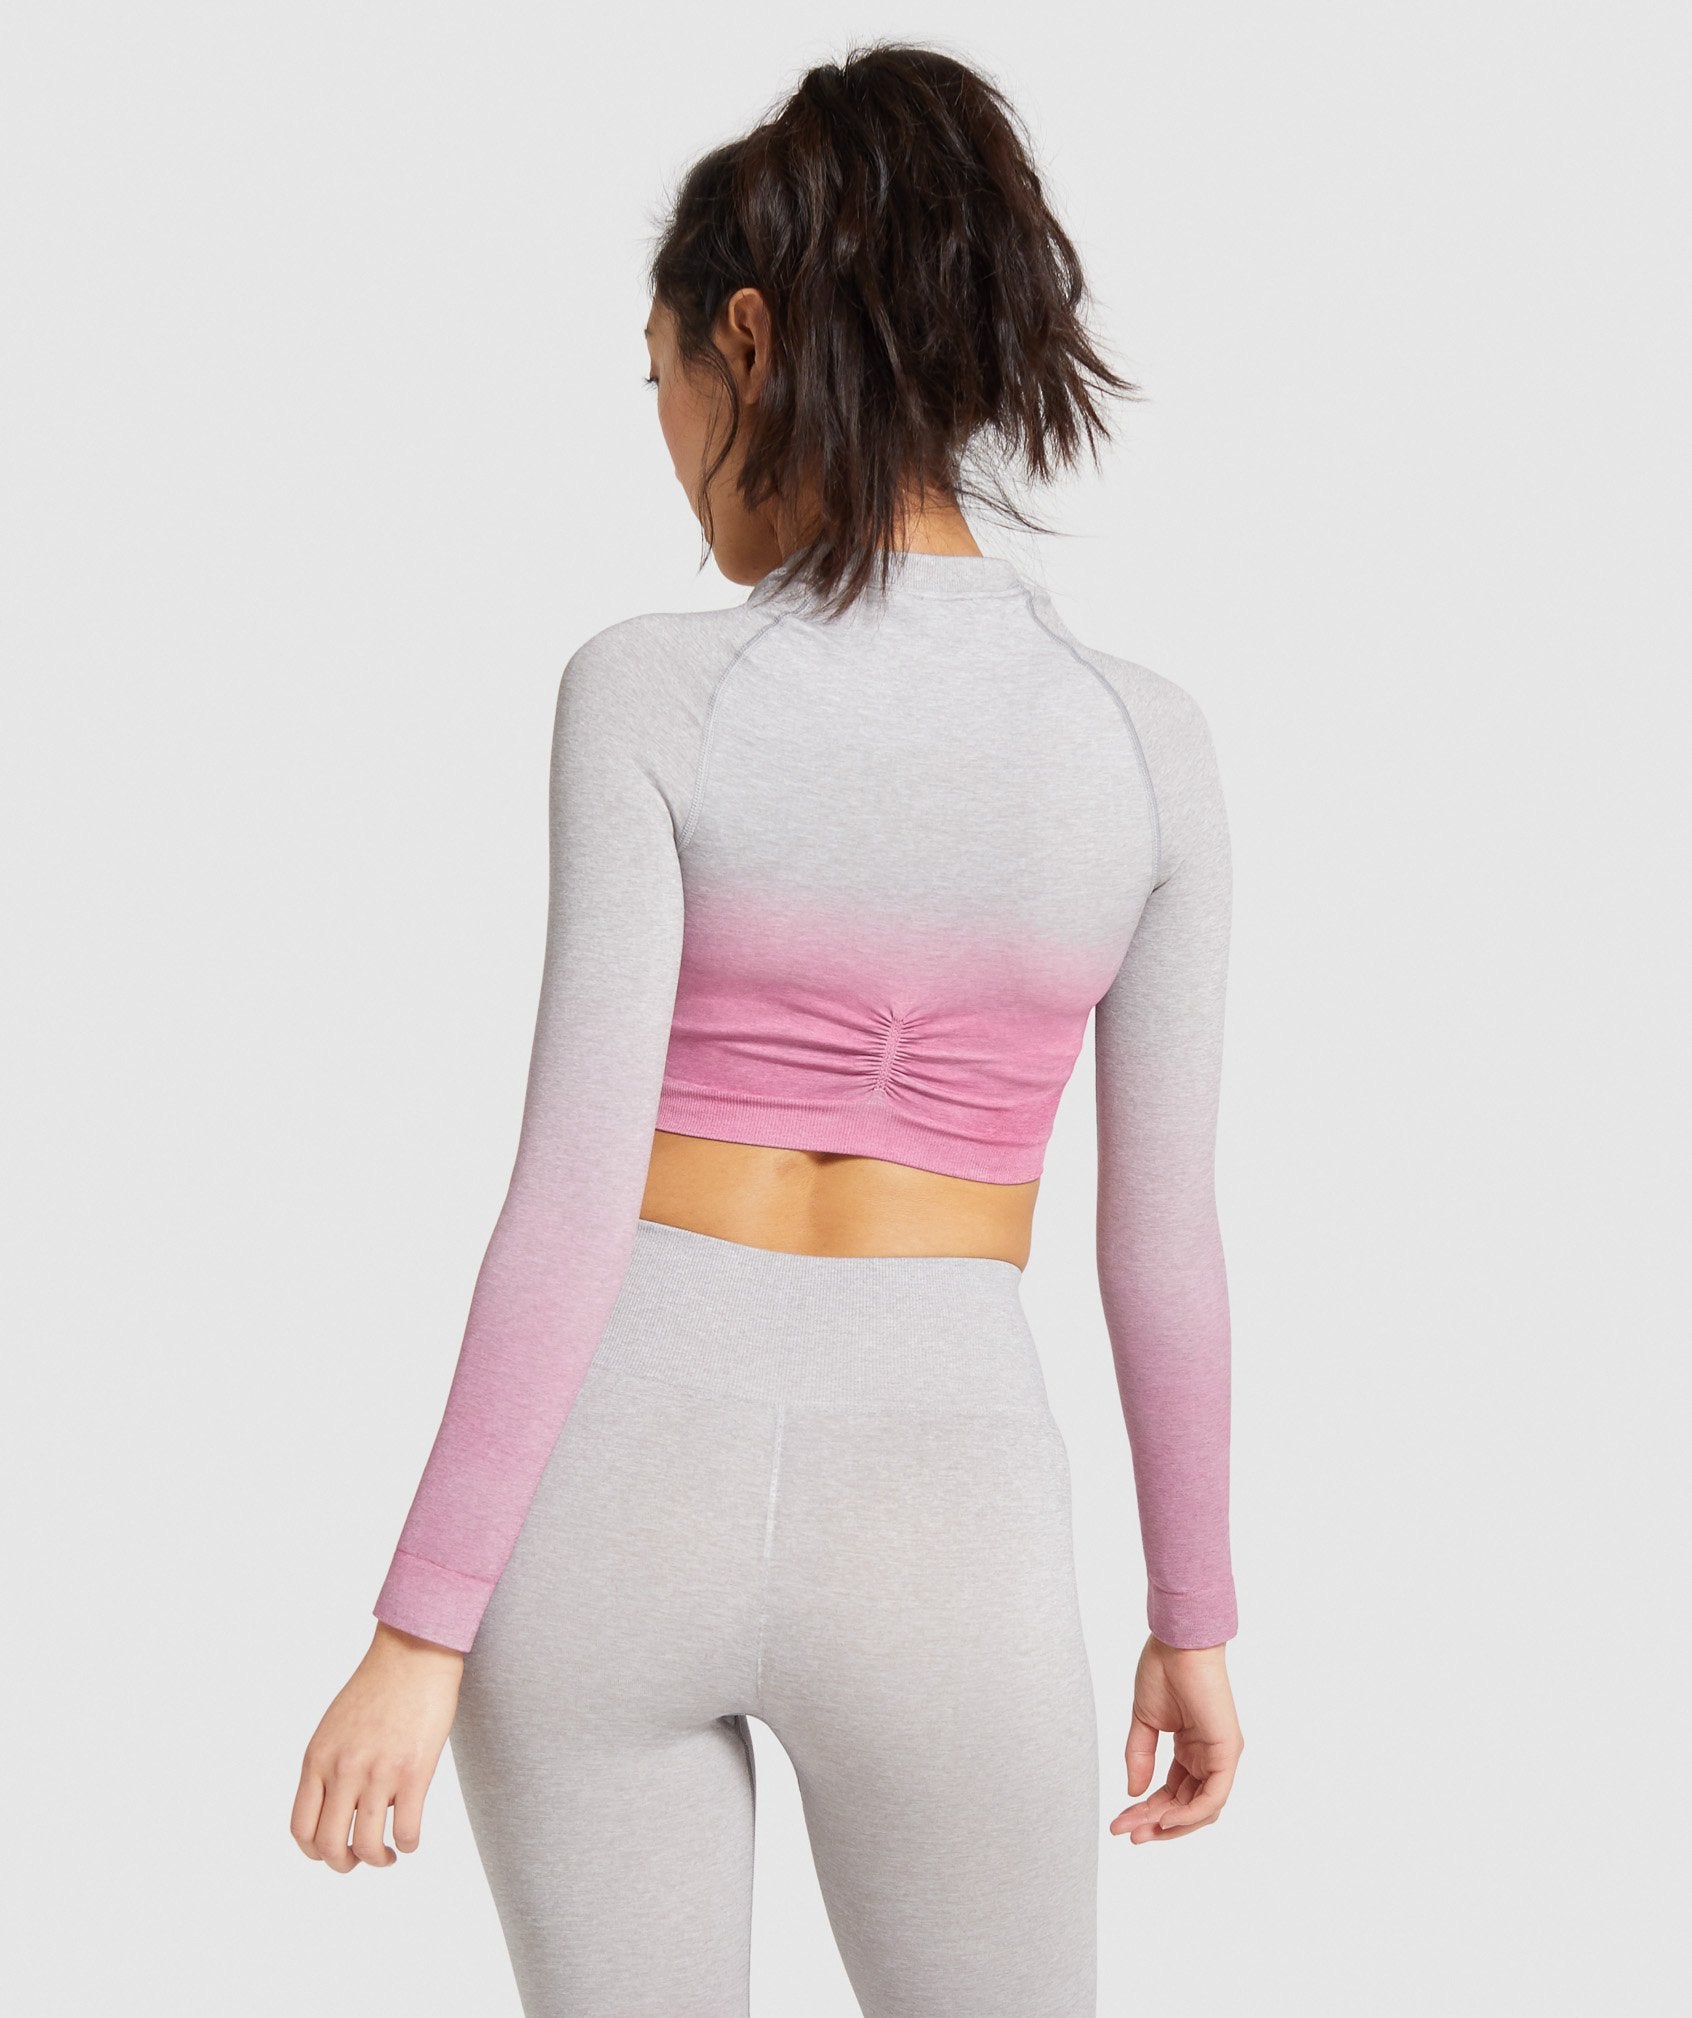 Gymshark Adapt Ombre Seamless Leggings and Long Sleeve Crop Top - Burgundy  Marbl Size XS - $69 - From Lynne